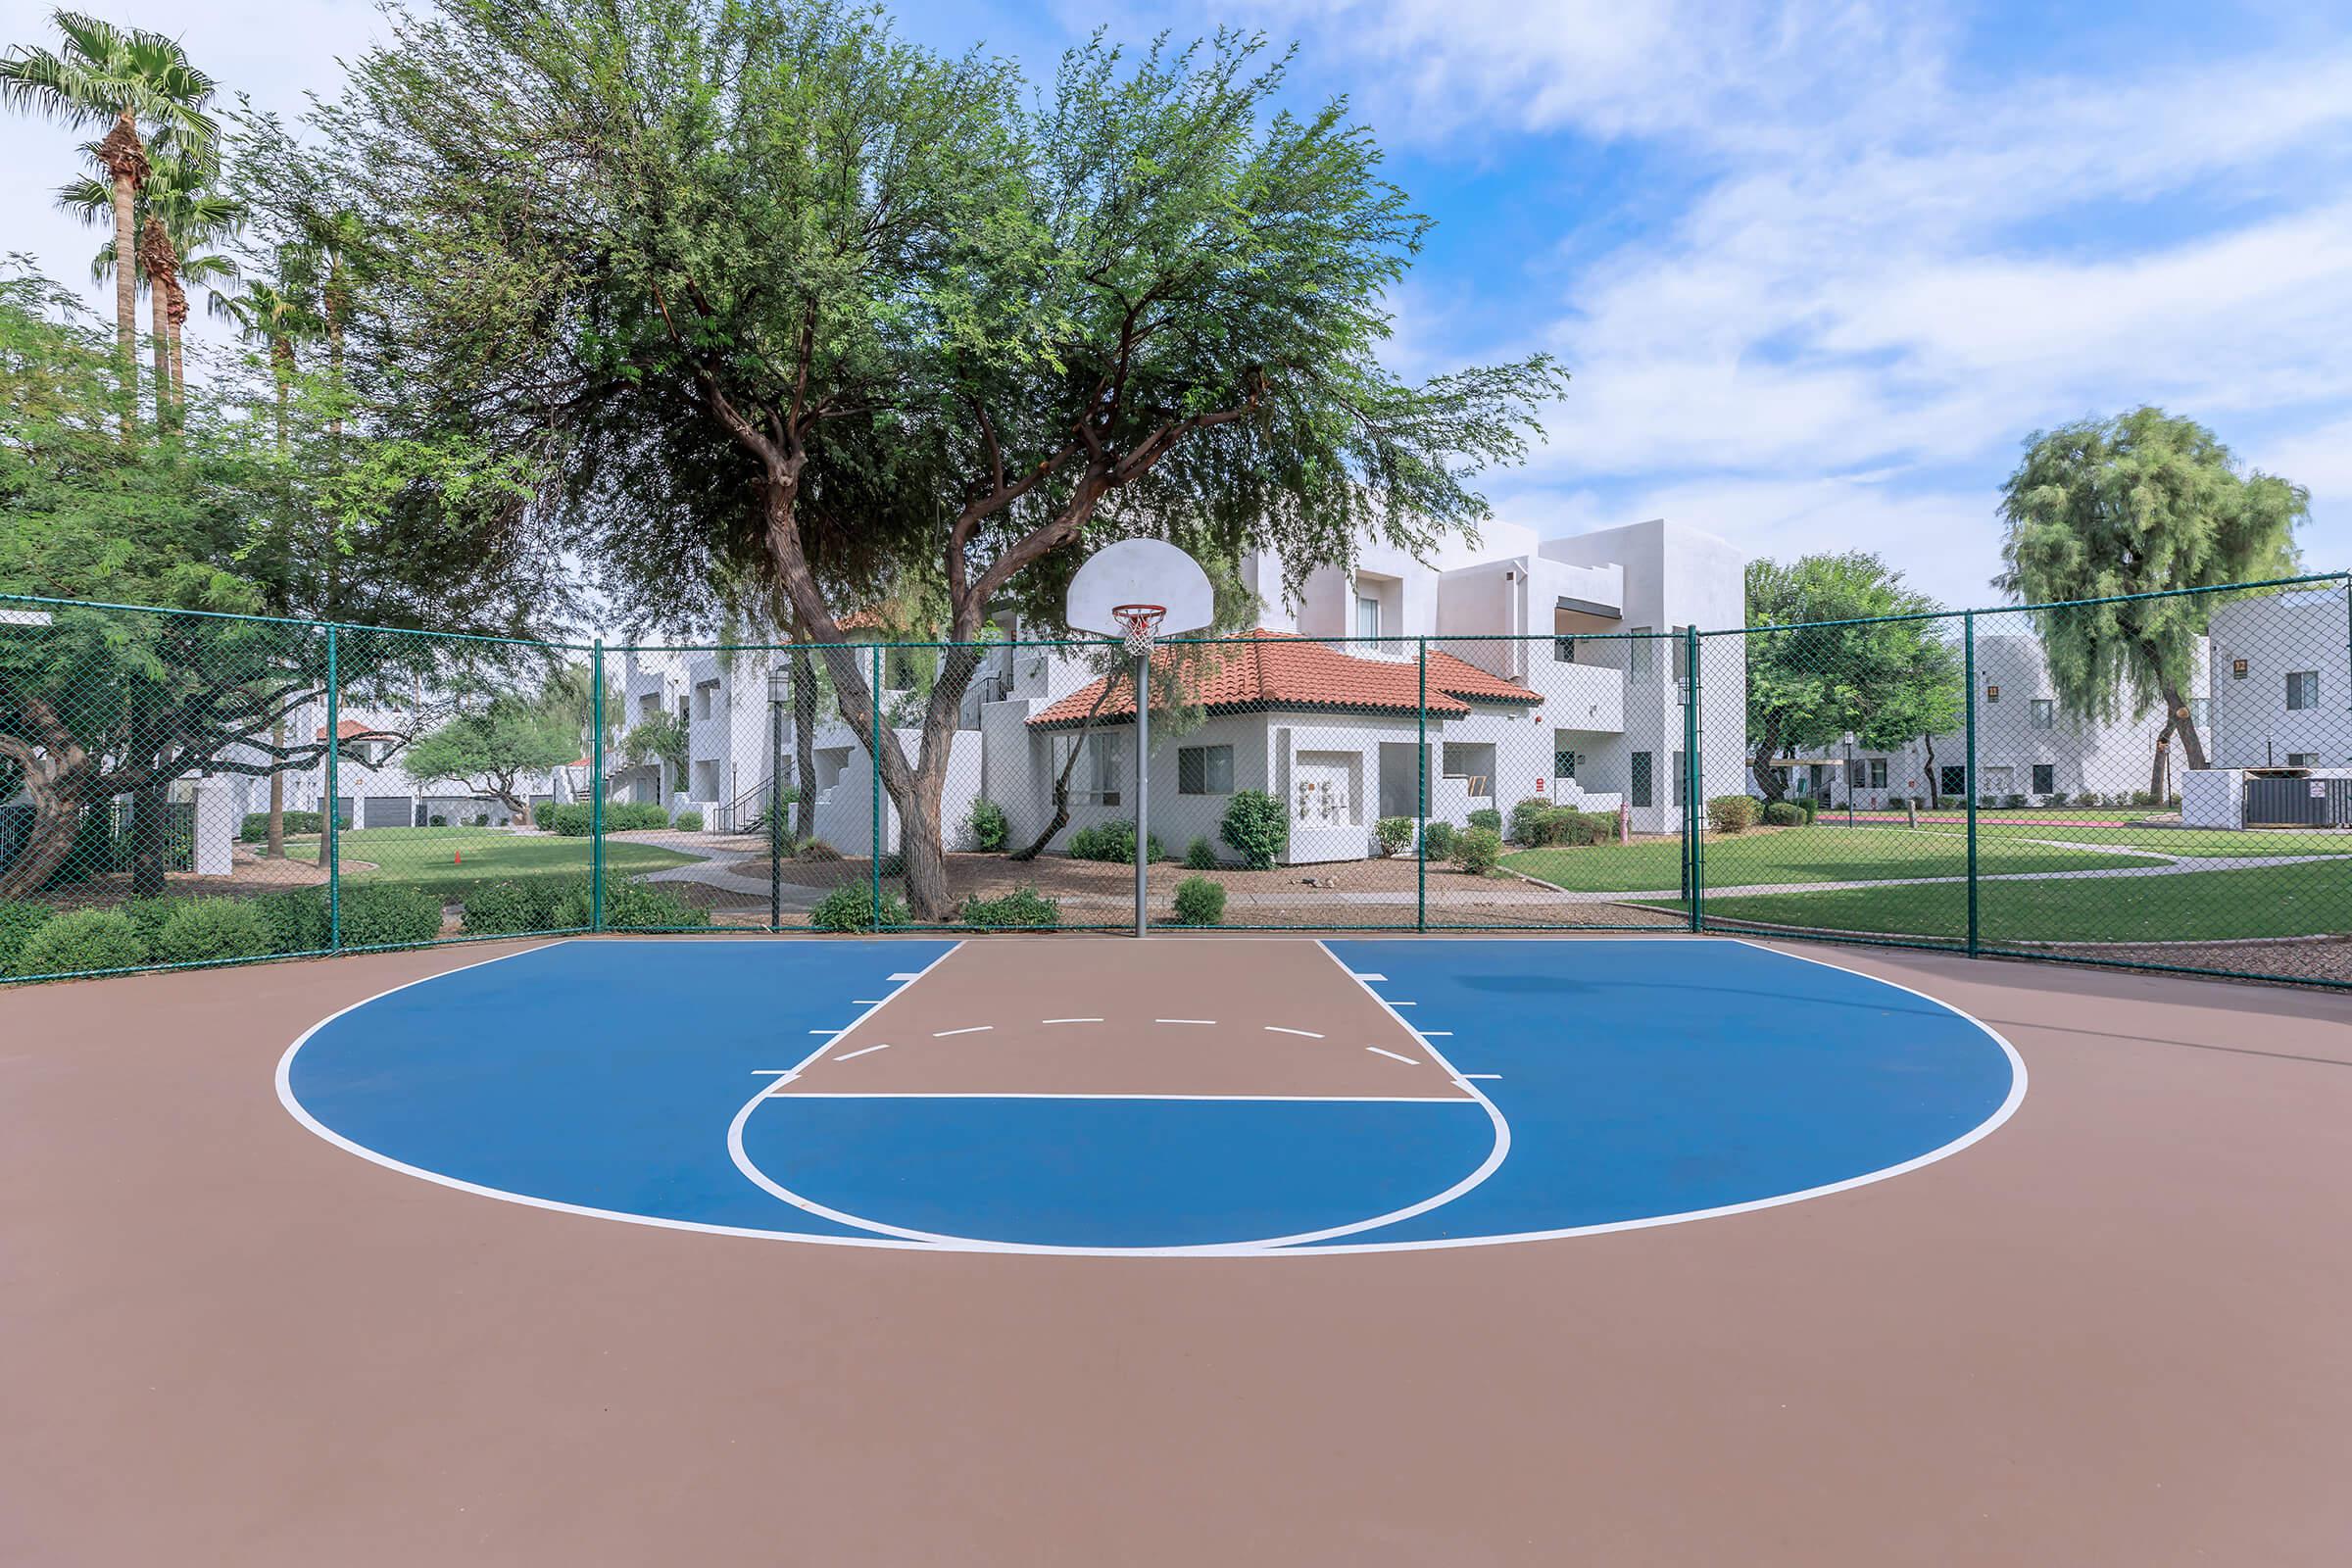 SHOOT SOME HOOPS AT TIDES AT PALM VALLEY